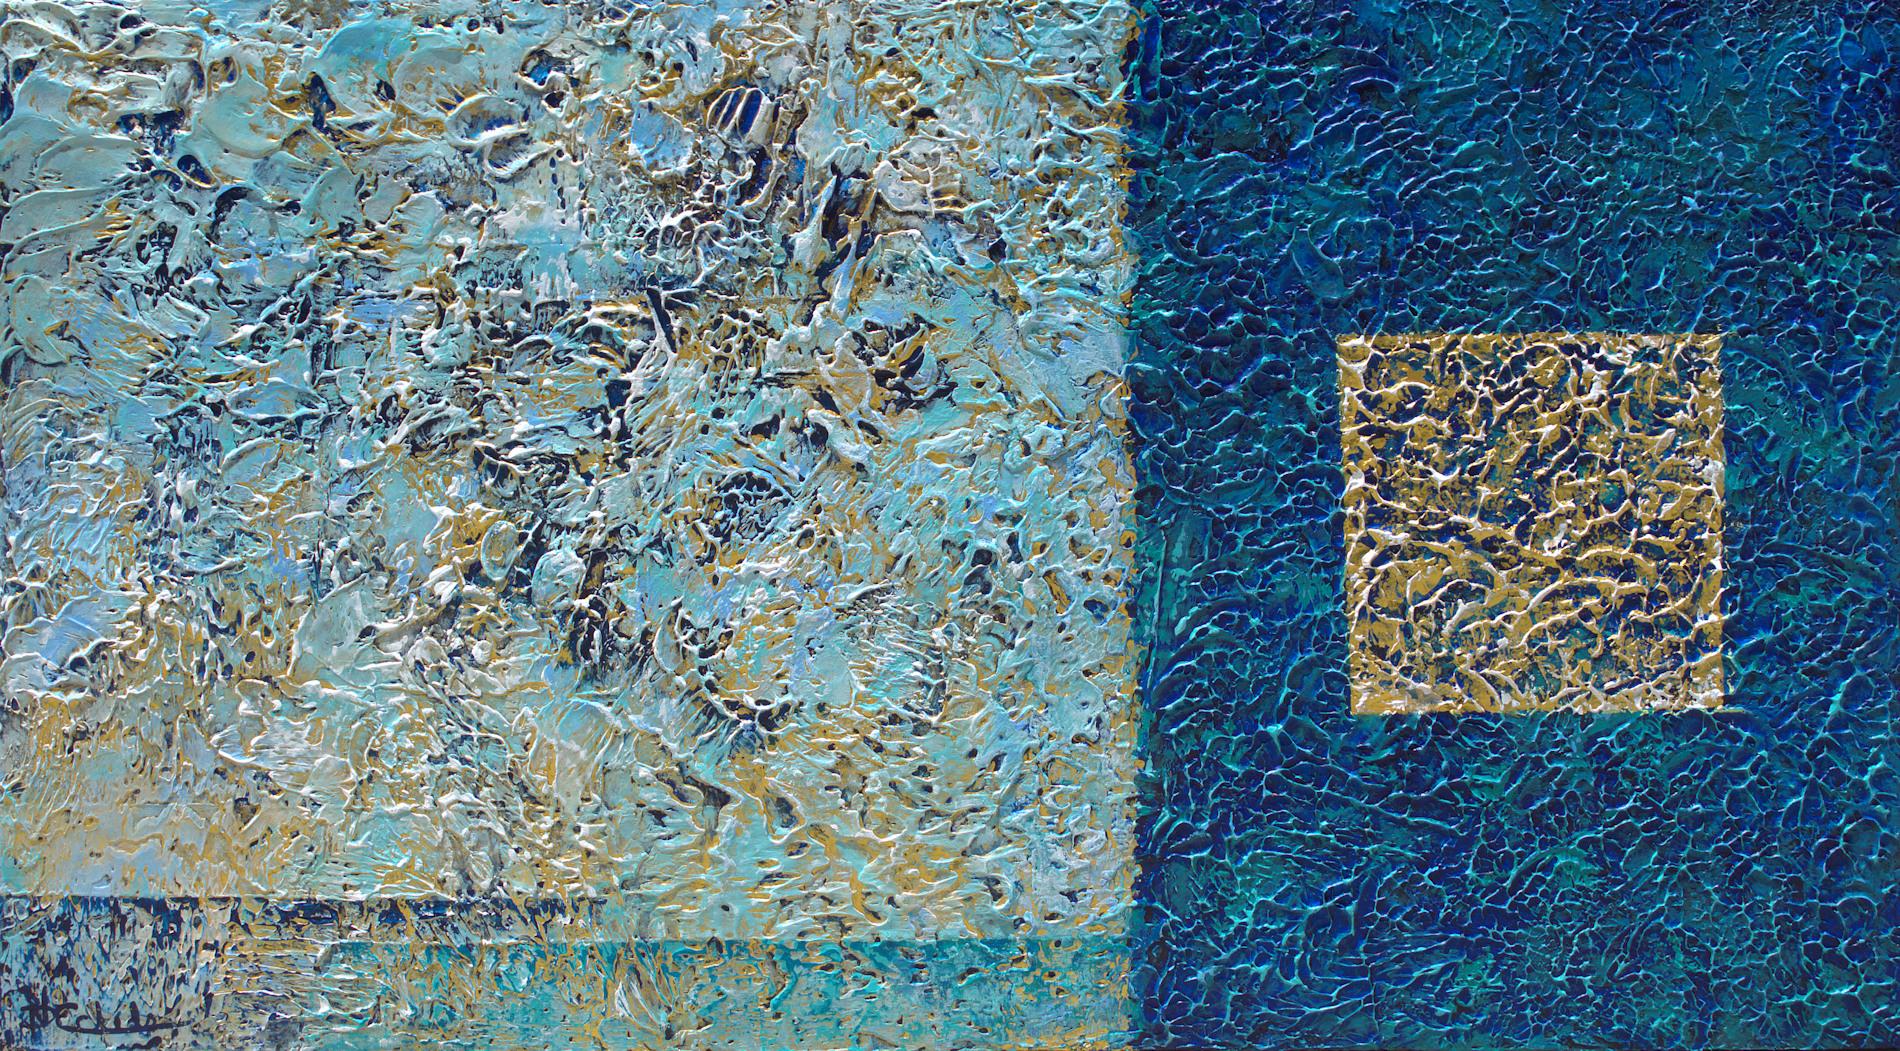 "Watery Windows" abstract painting with textural greens, blues and gold metallics - Mixed Media Art by Nancy Eckels